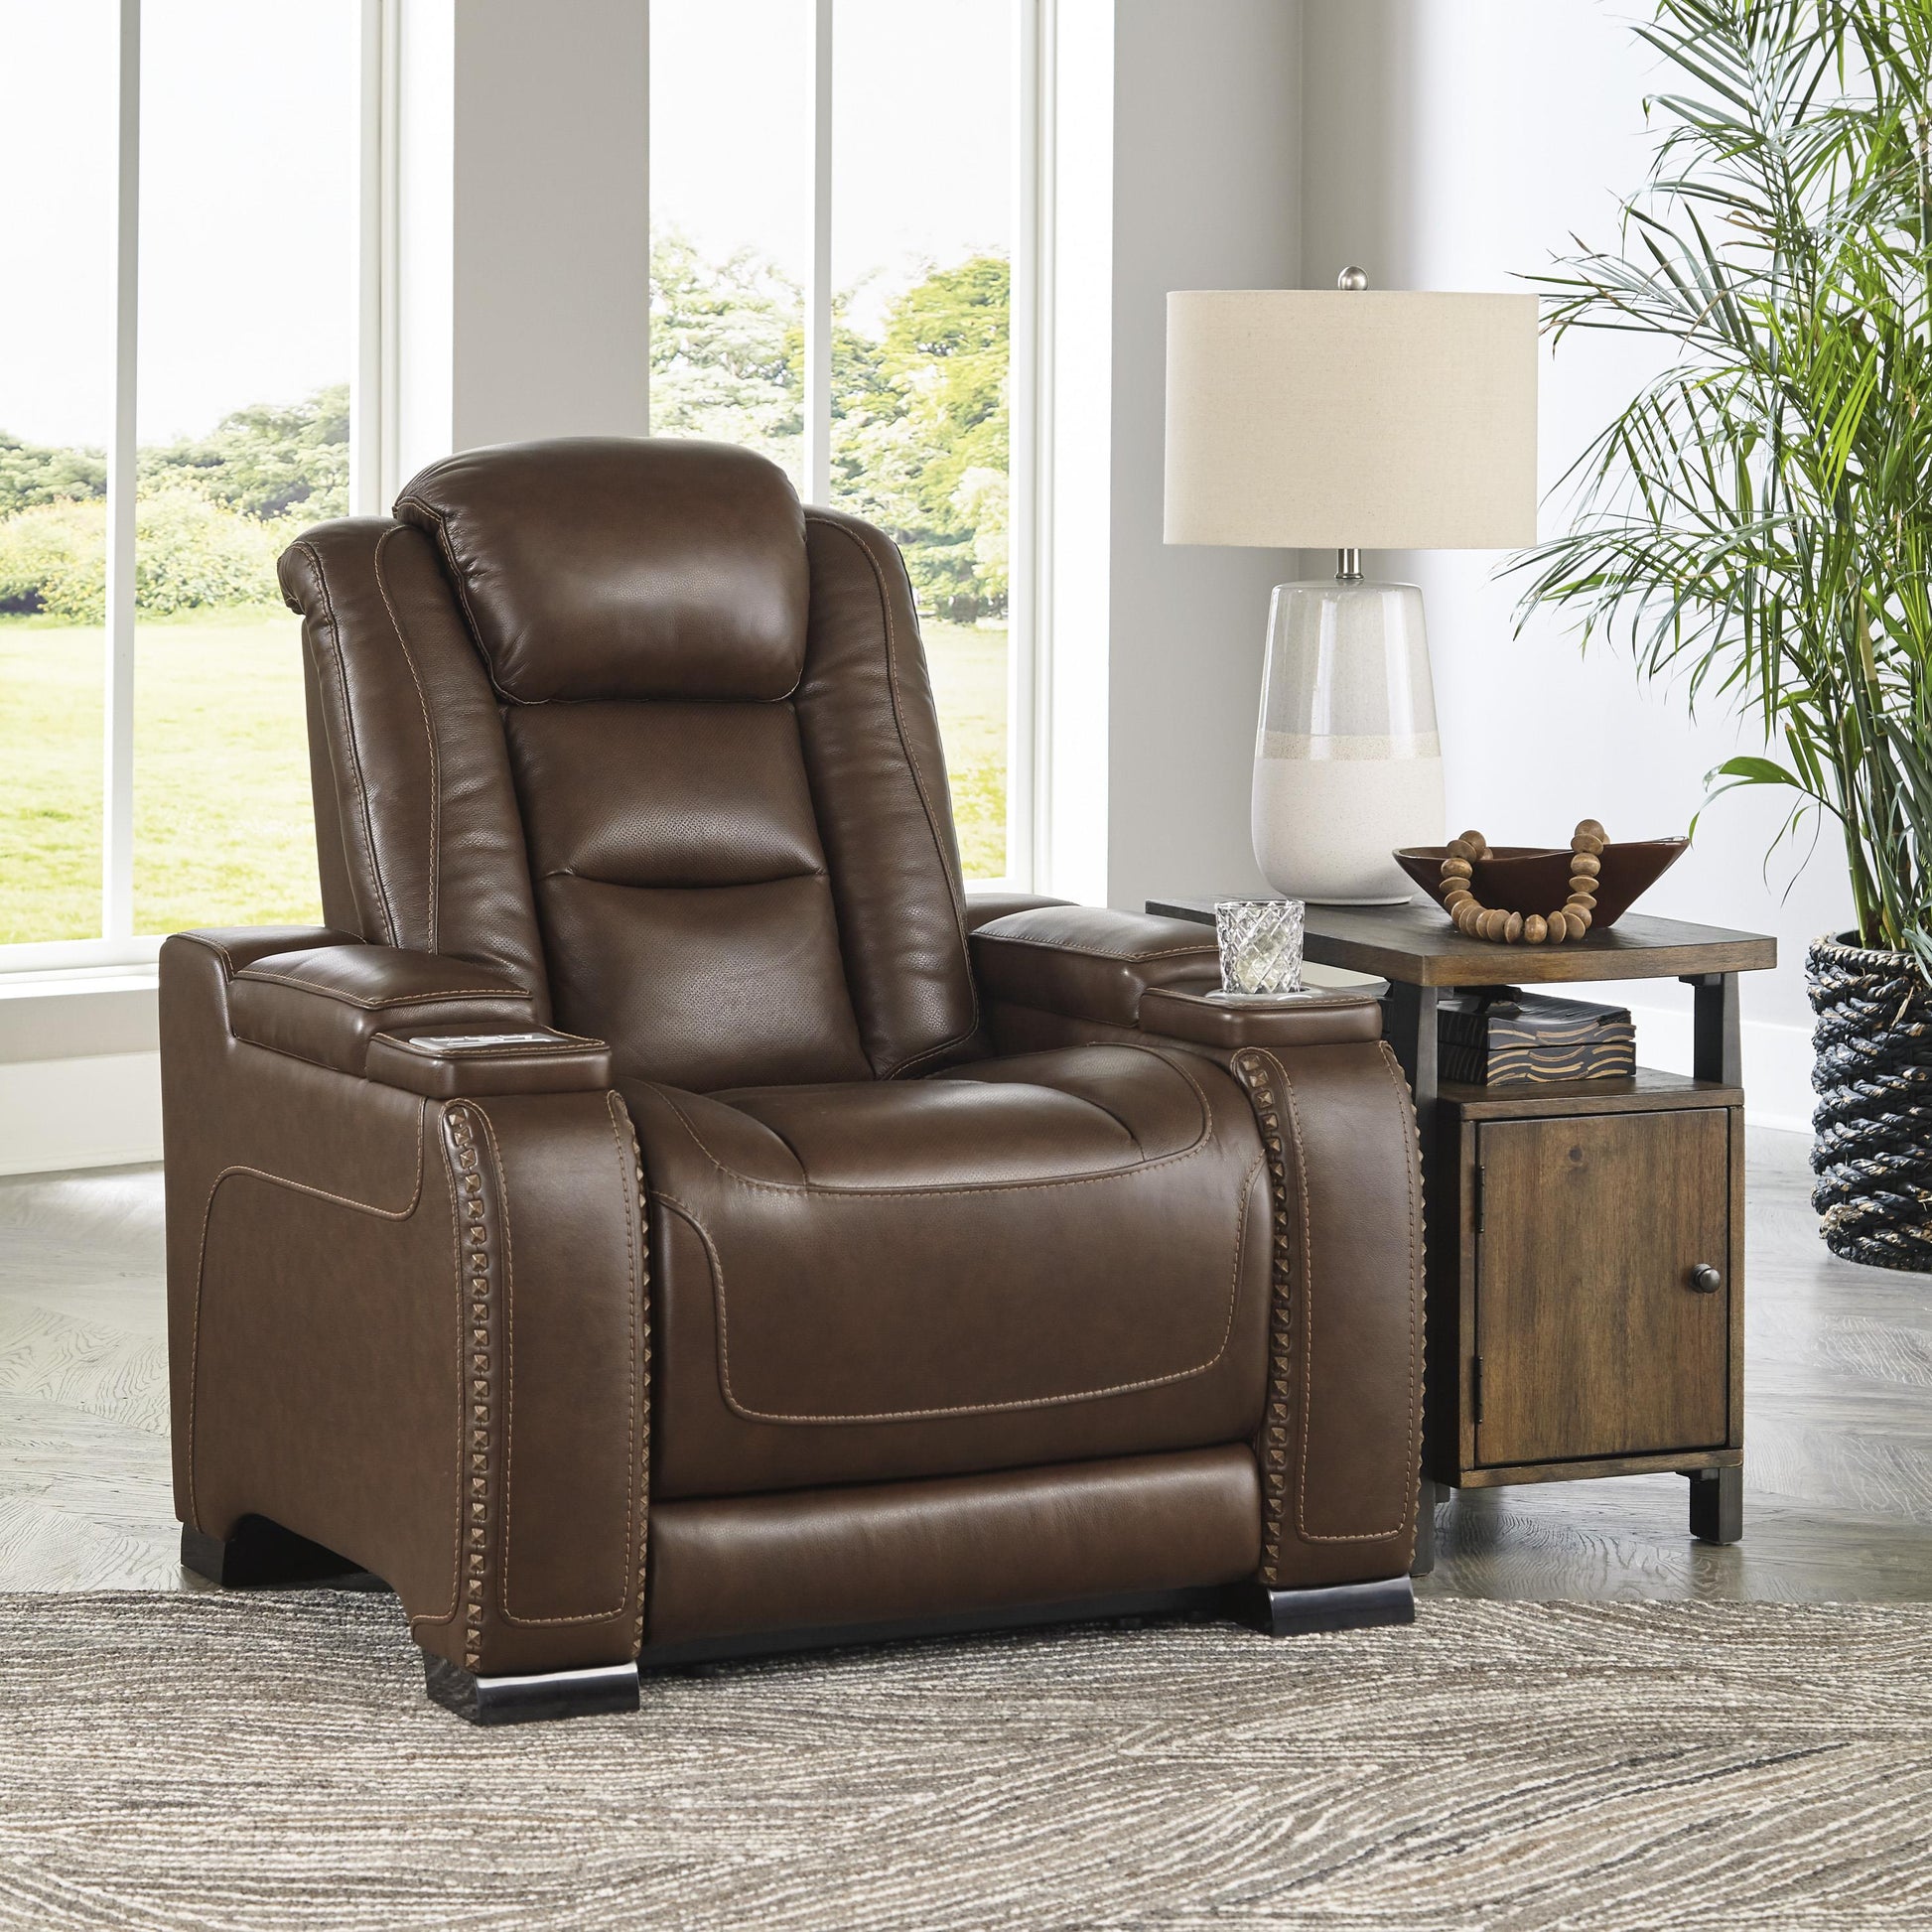 Signature Design by Ashley The Man-Den Power Leather Match Recliner U8530613 IMAGE 5